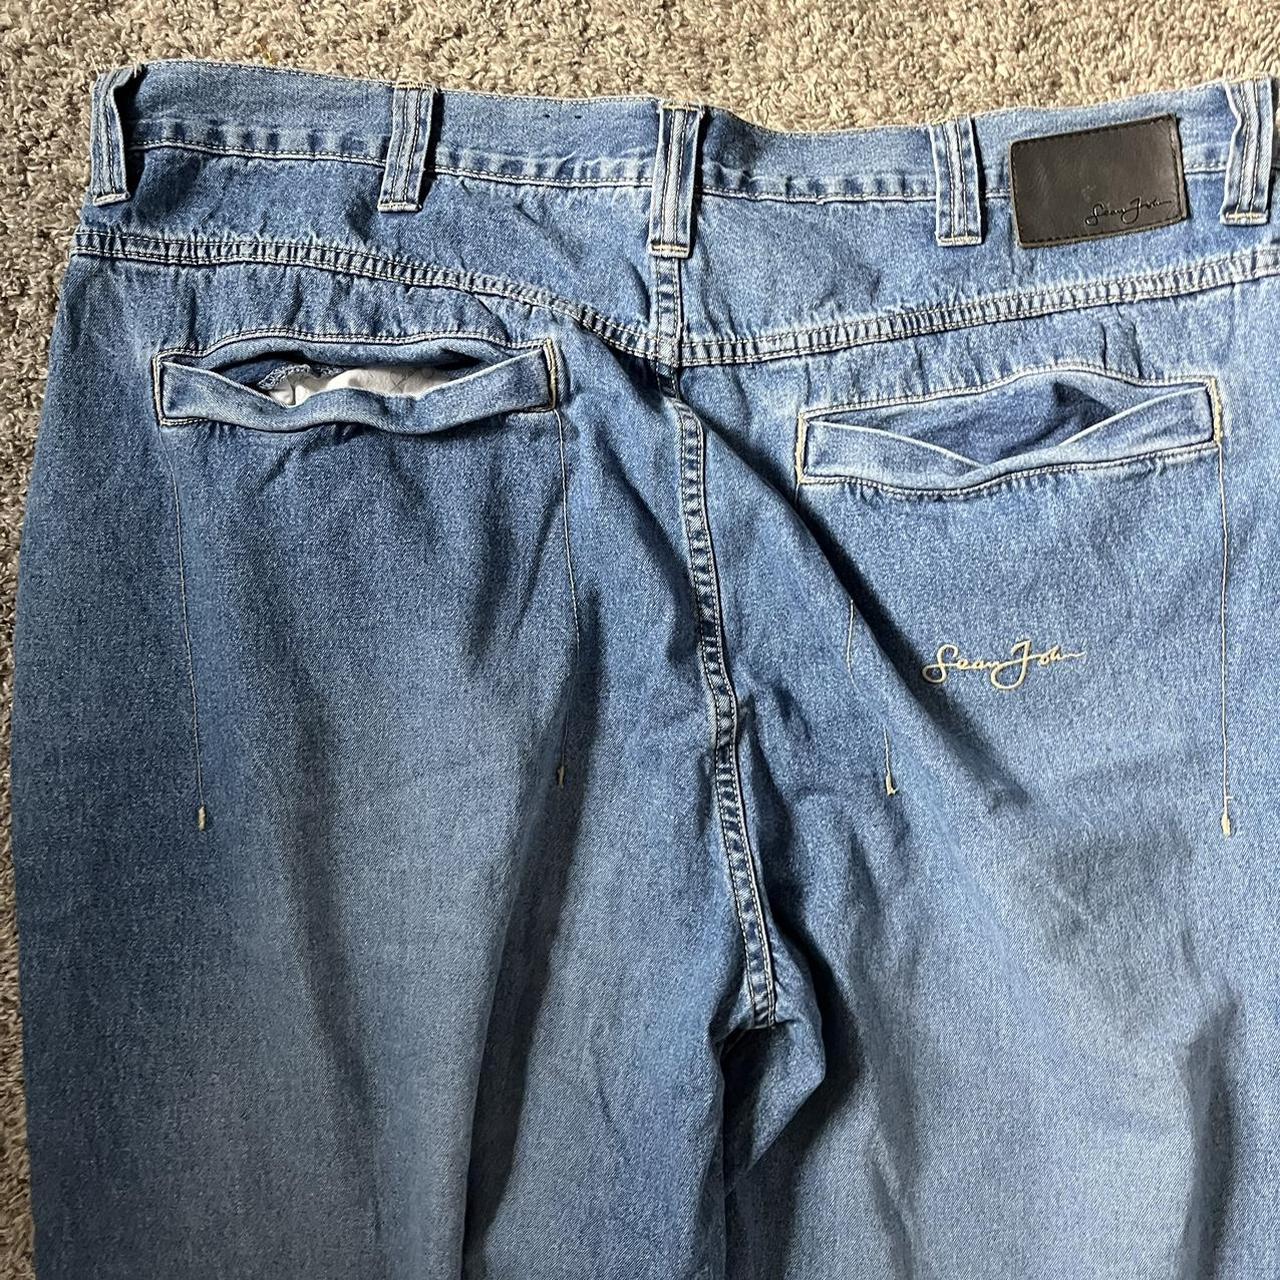 Insanely baggy embrodiered Sean john jeans, dm me... - Depop